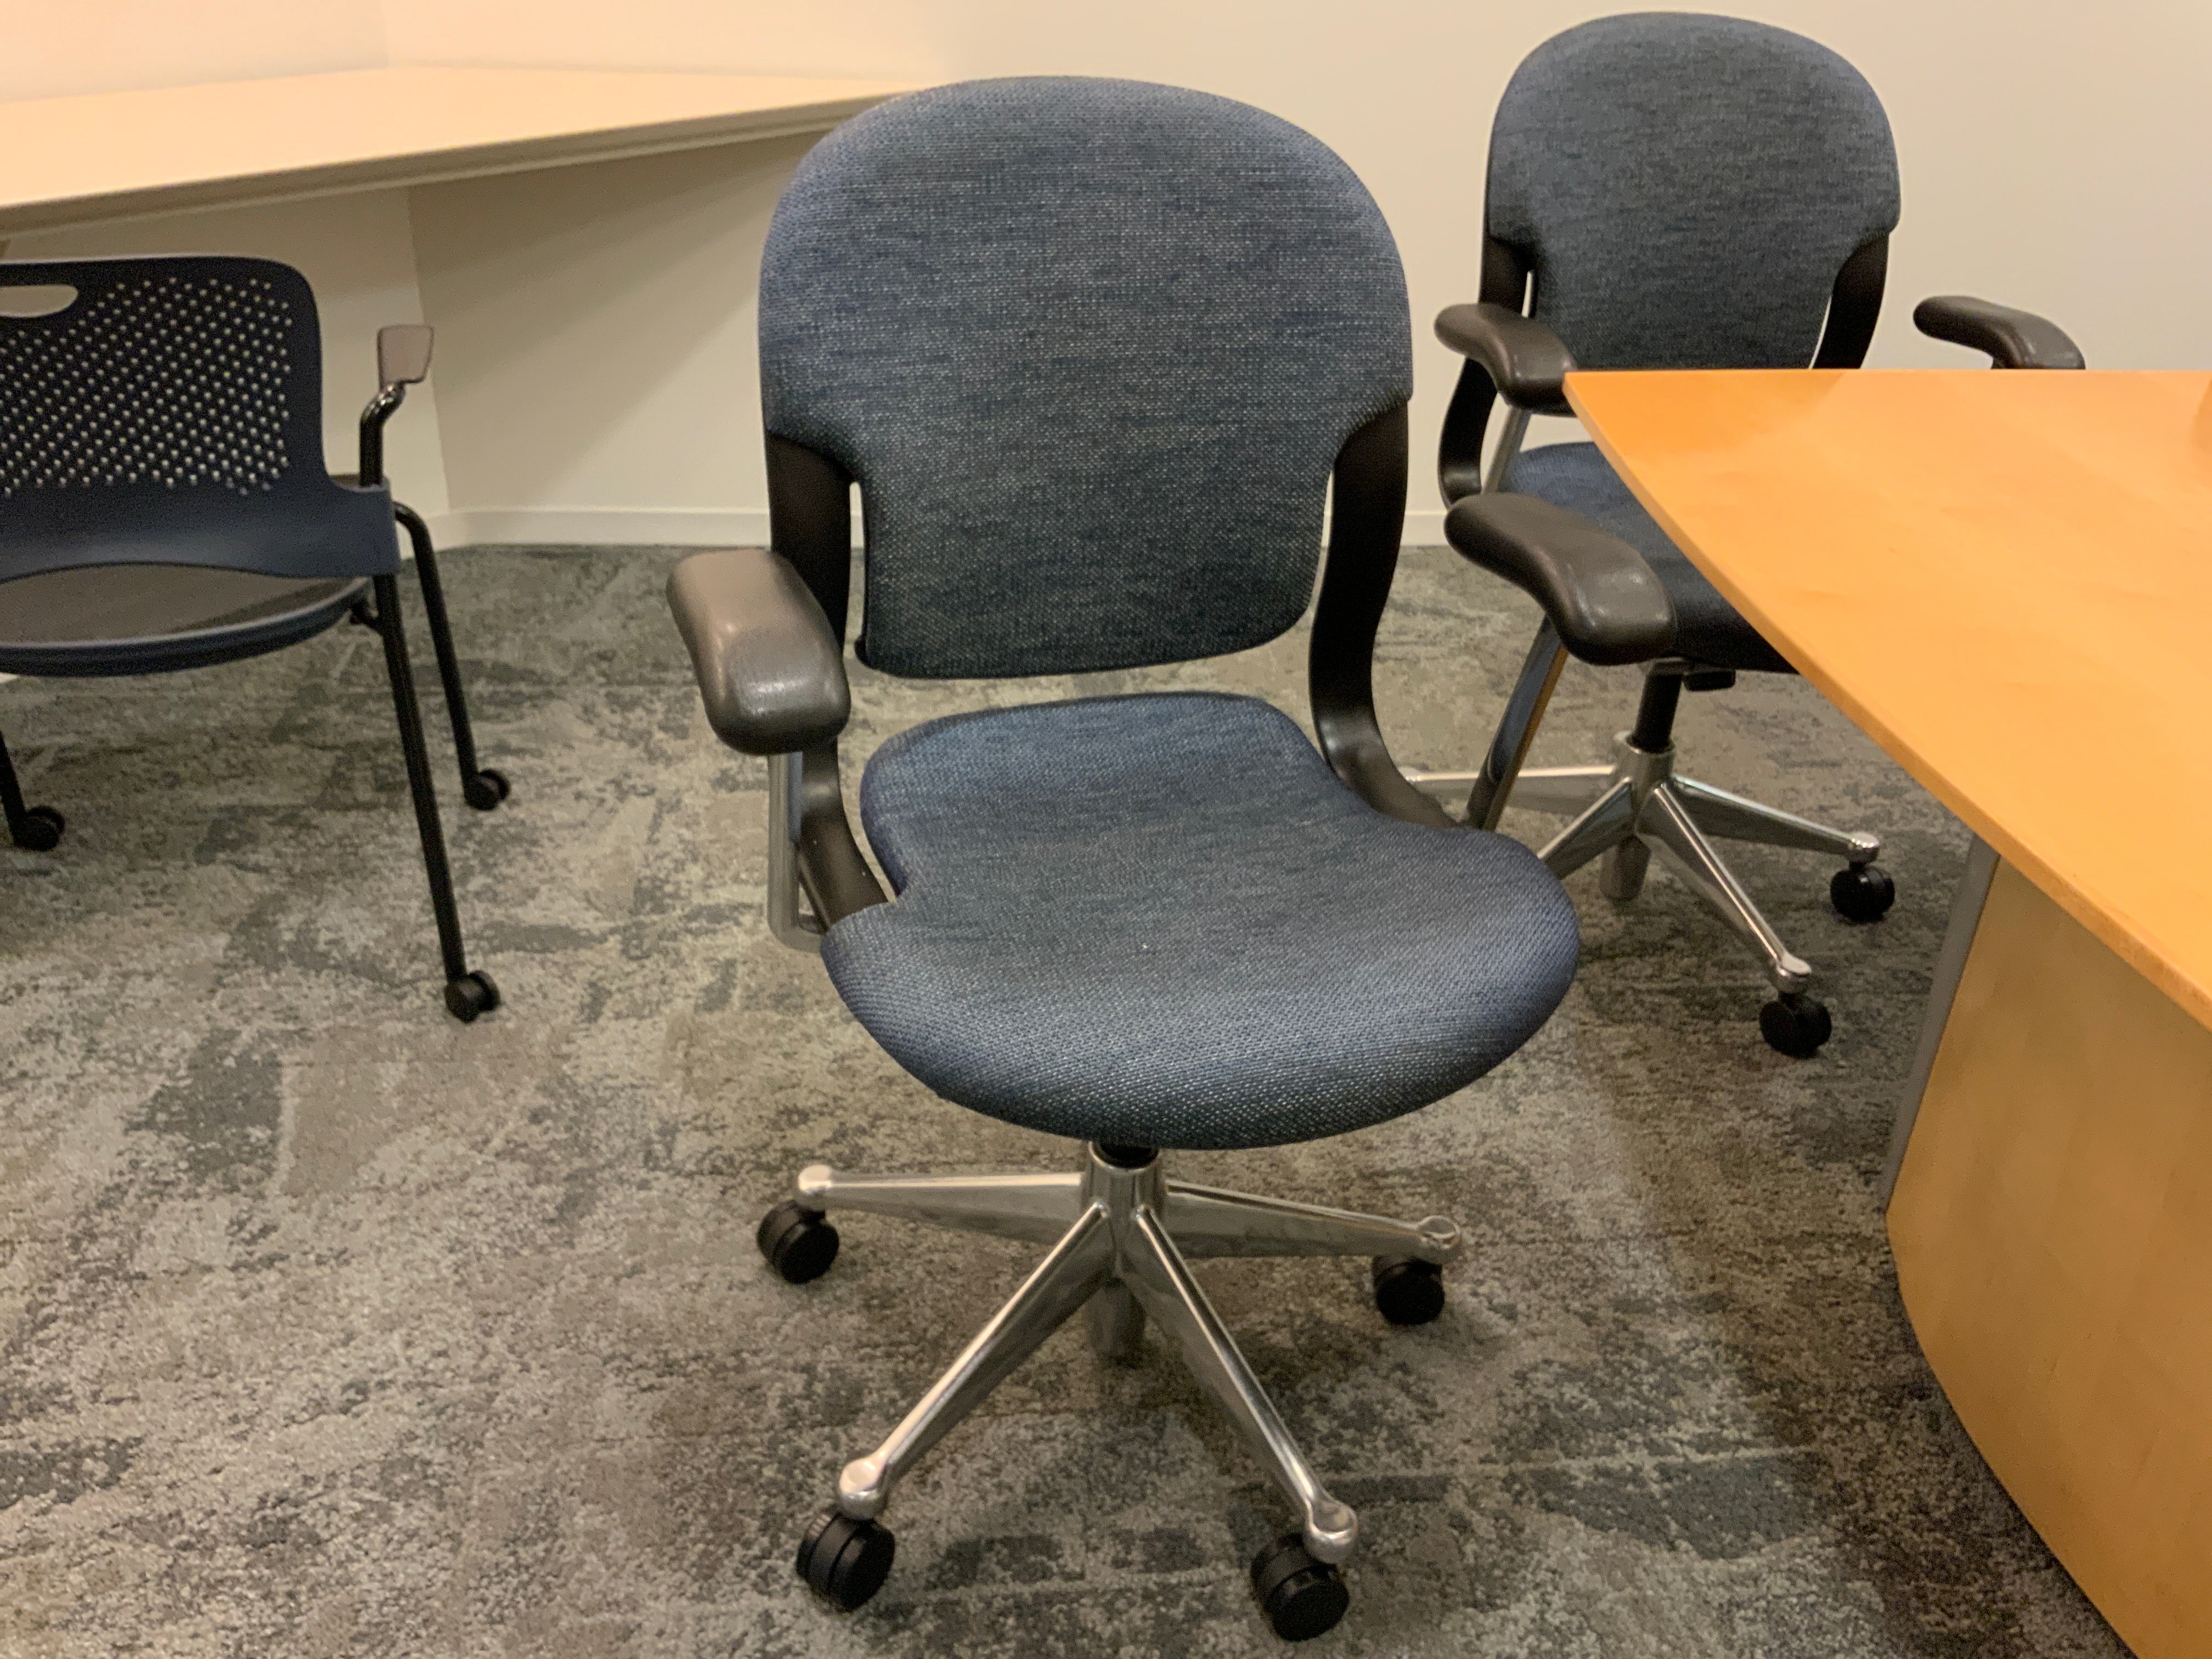 Herman Miller Equa Task Chair - Preowned - FOB Vernon Hills, IL (Min Purchase Qty = 20)